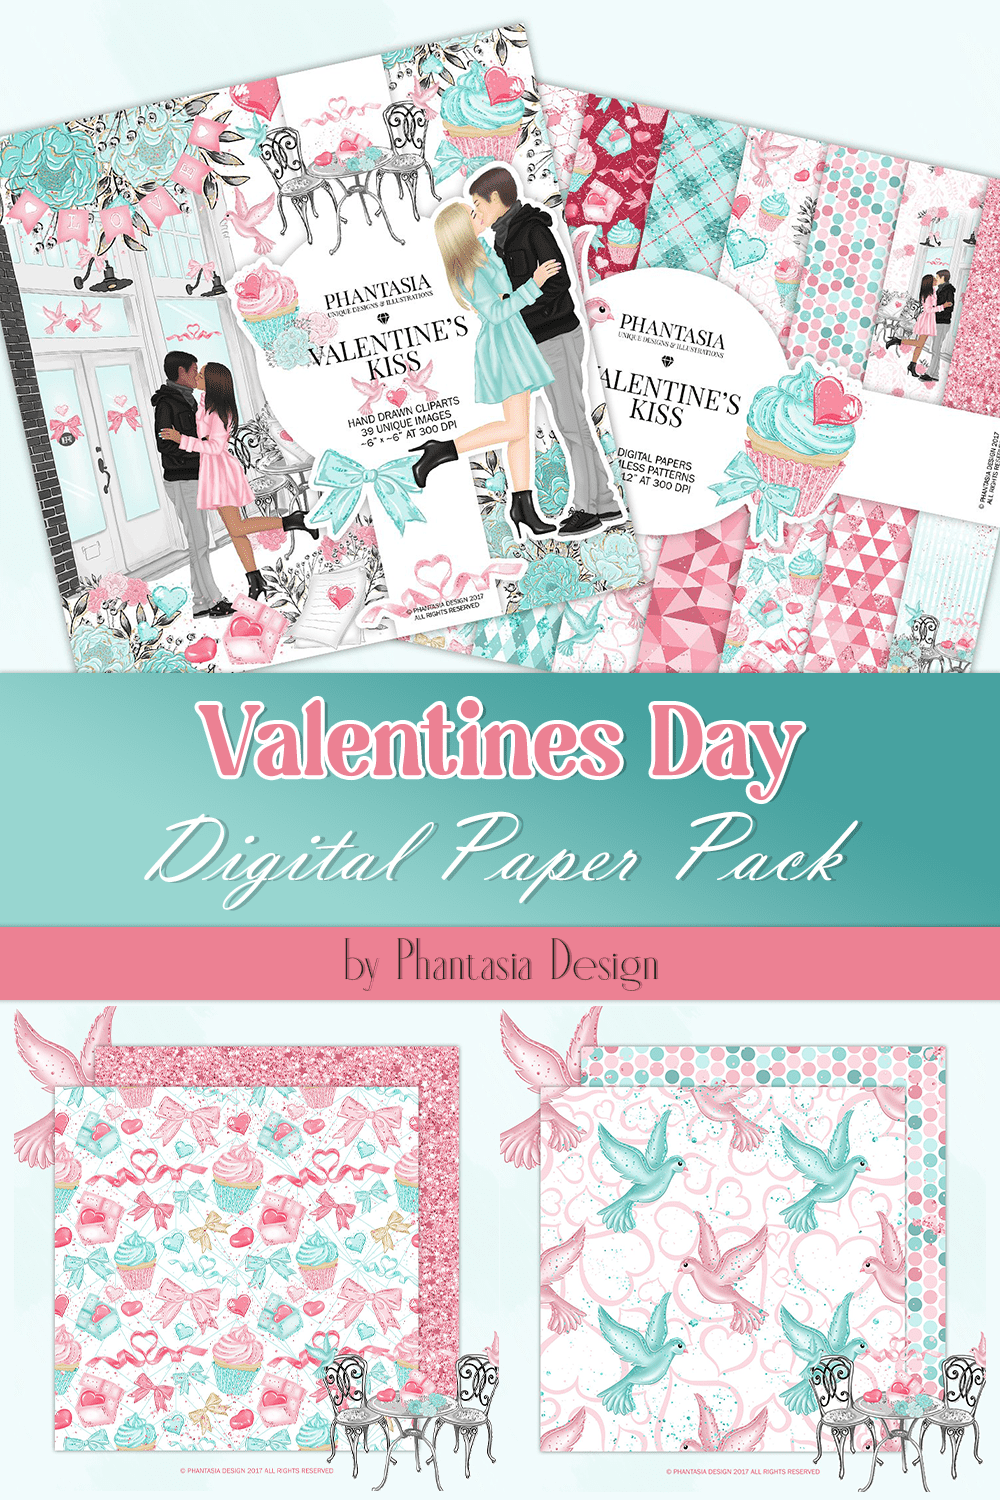 Valentines Day Digital Paper Pack - pinterest image preview.